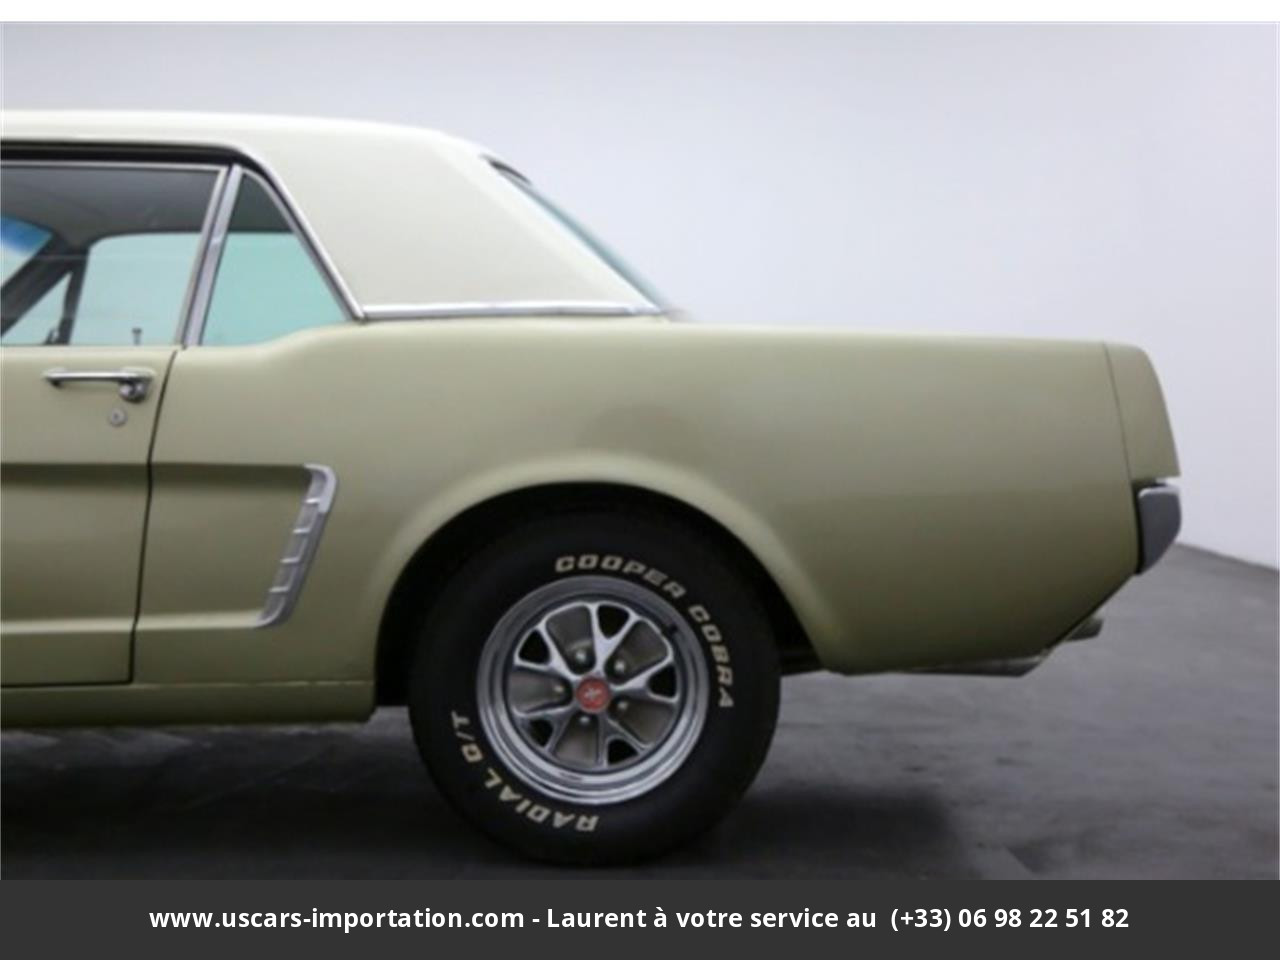 Ford Mustang Code a v8 1965 prix tout compris